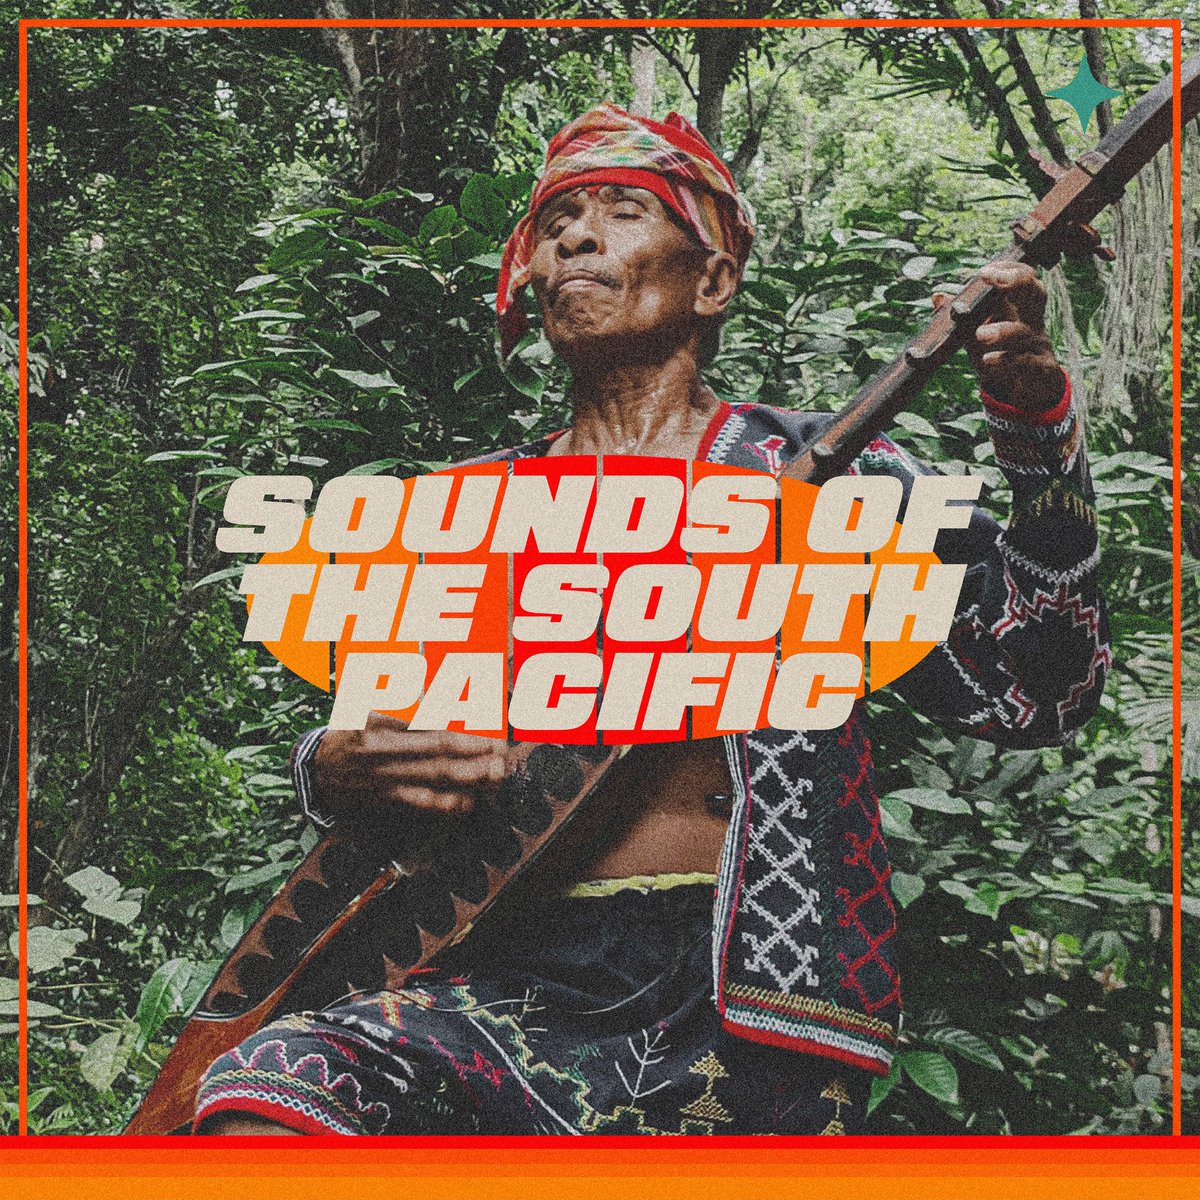 🌴🎶 Transport yourself to a world of sunny shores and vibrant cultures with our playlist, 'Sounds of the South Pacific.' ☀️✨ 

spoti.fi/3PH3Dvl!

🔗�#southpacificsounds #islandrhythms #tropicalparadise